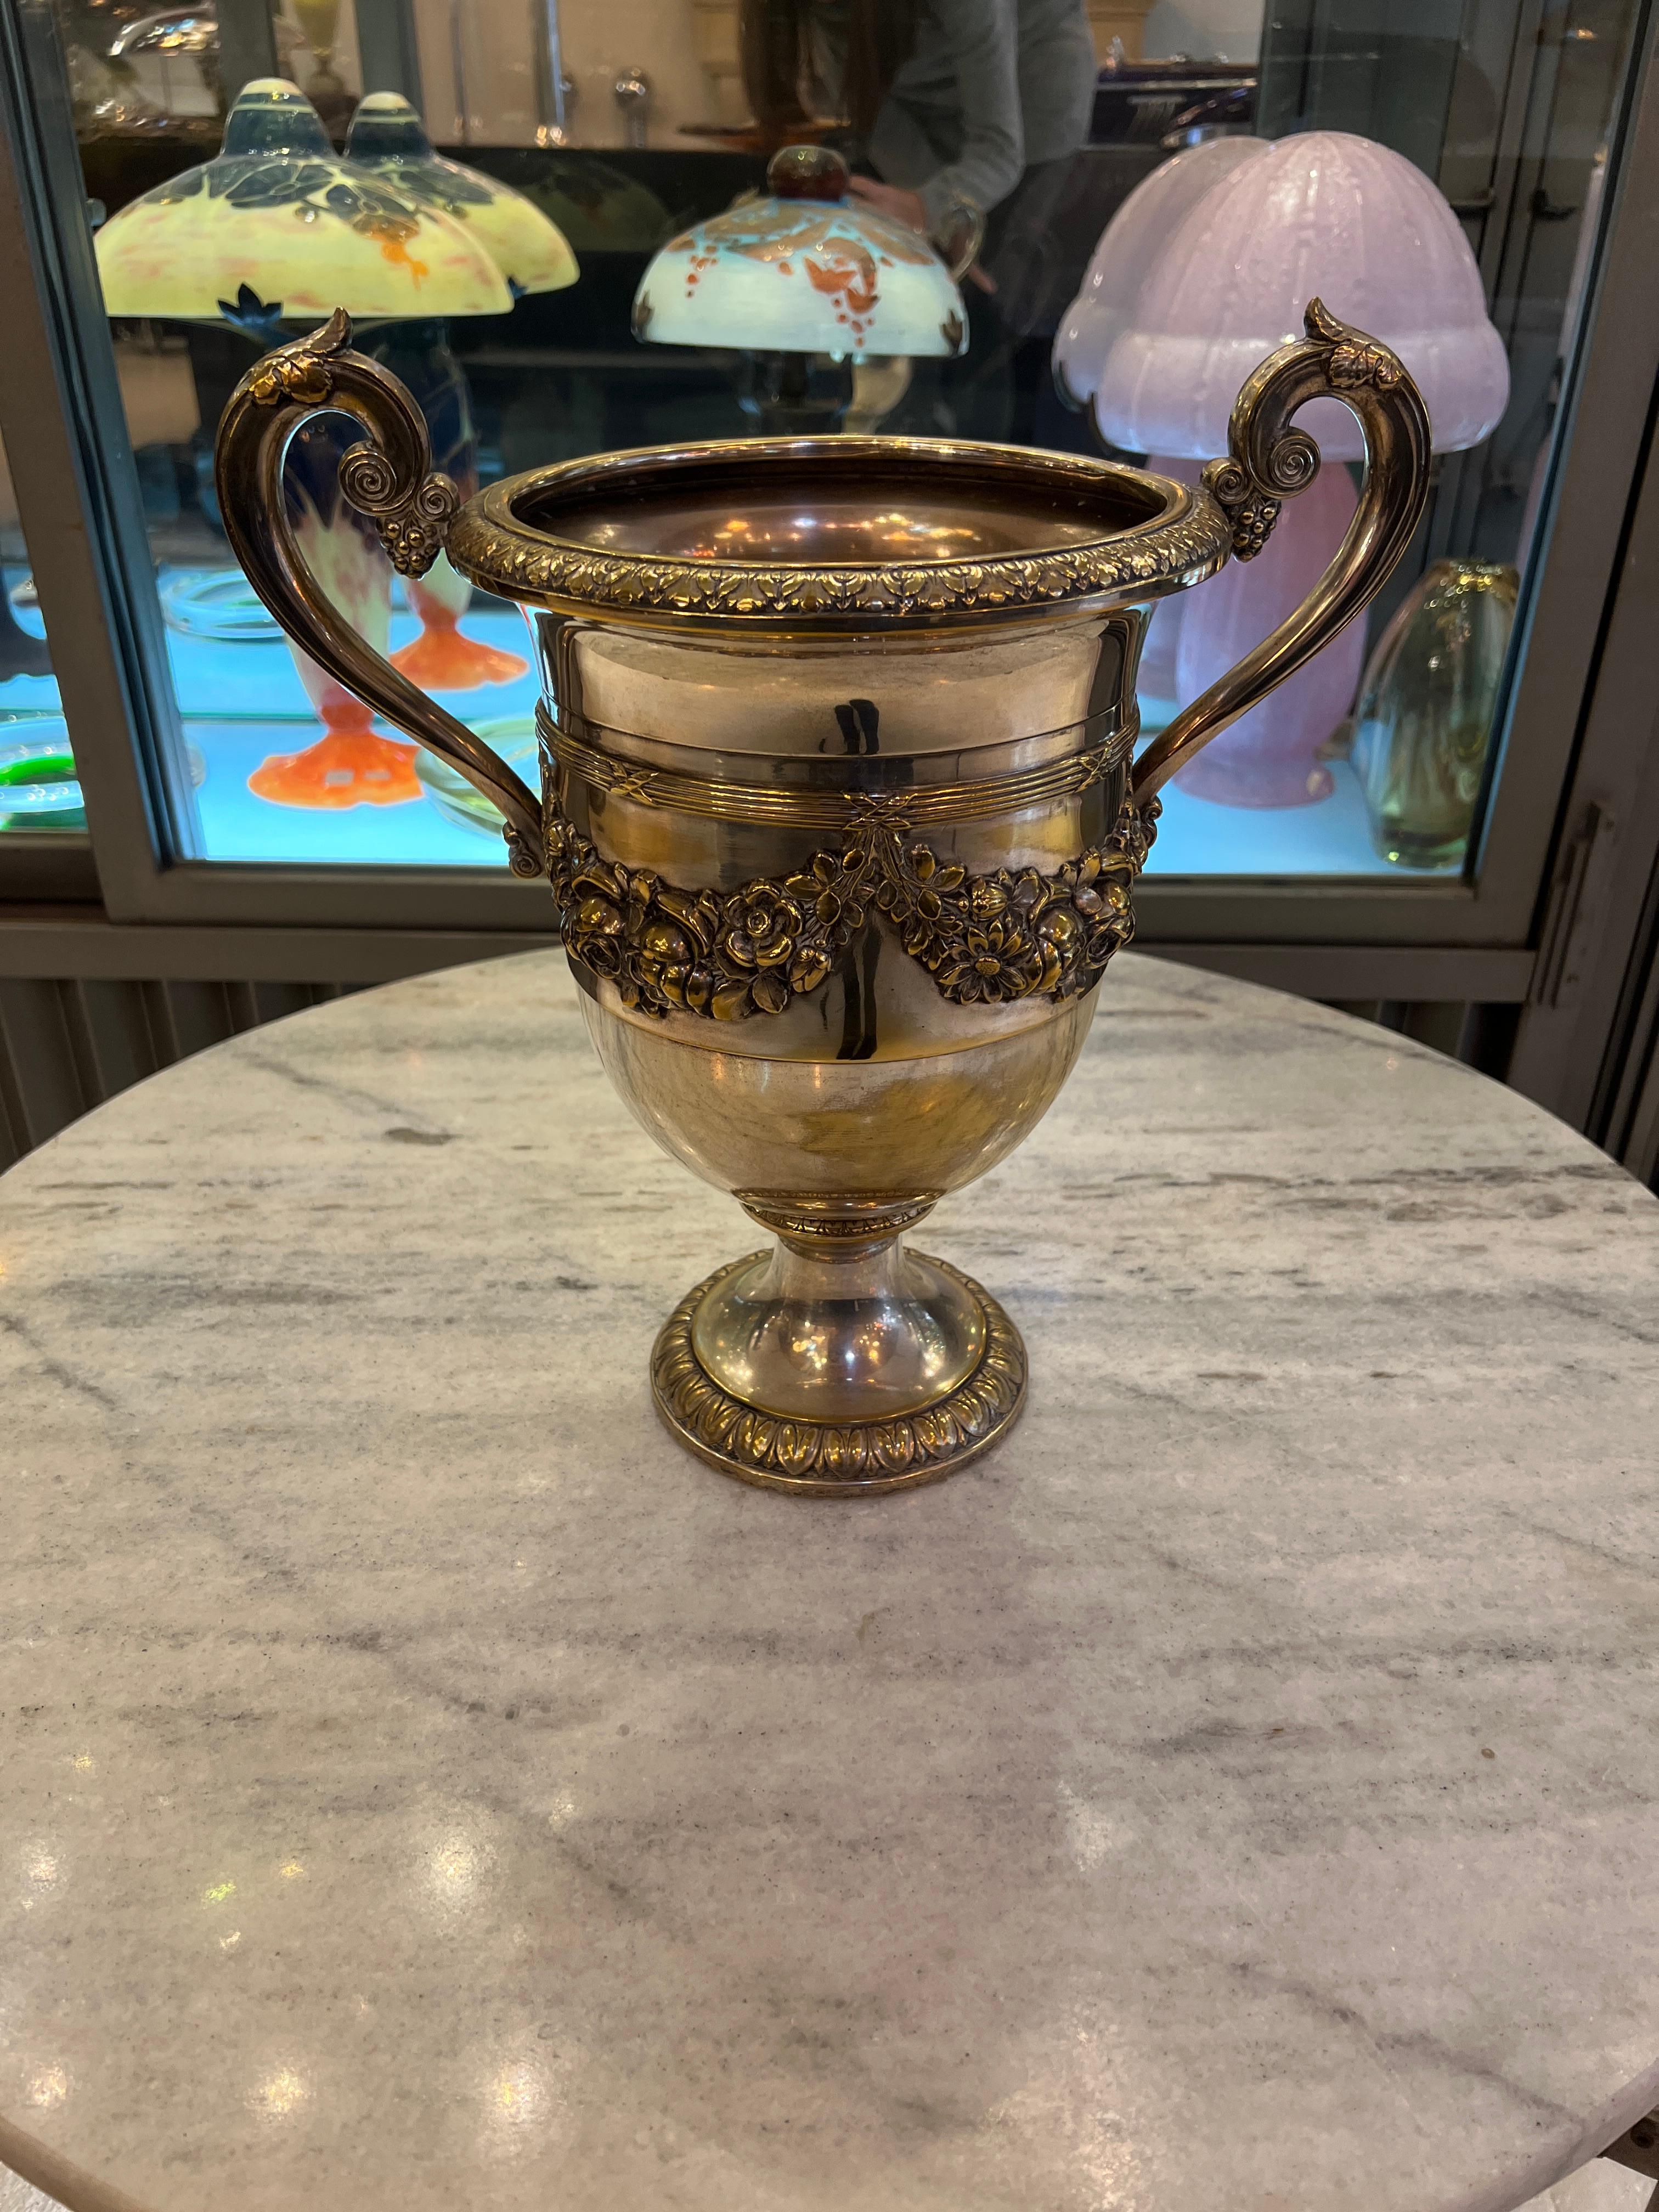 Can be re-silvered or gilded
If you have any questions we are at your disposal.
Pushing the button that reads 'View All From Seller'. And you can see more objects to the style for sale.
Why are there so many antiques in Argentina?
In the 1880 – 1940